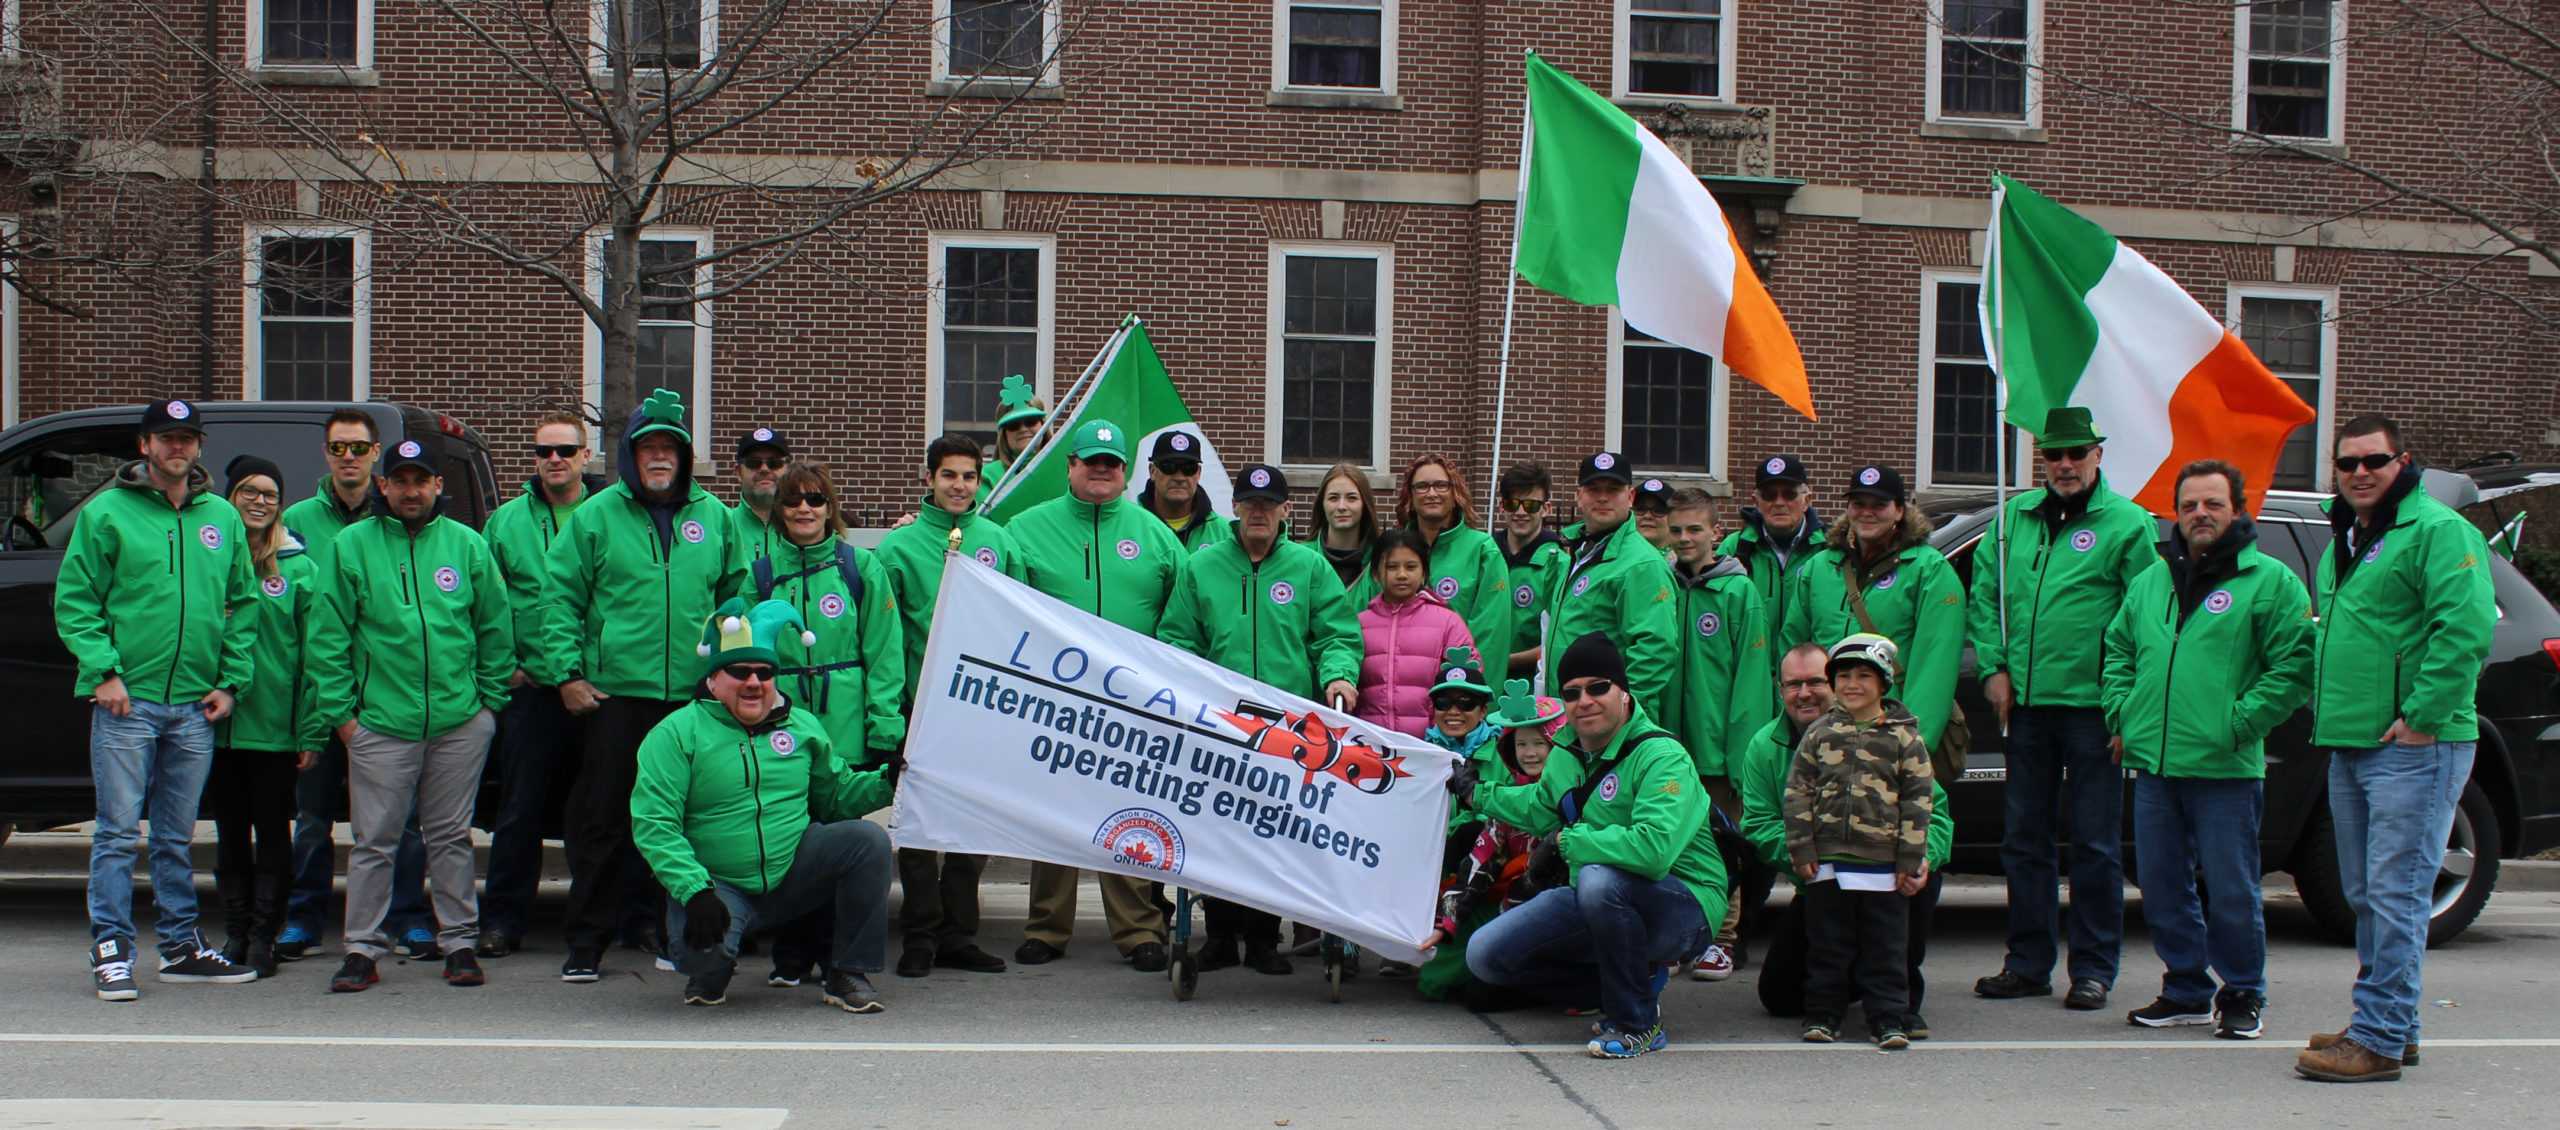 Local 793 members prepare to march in the St Patrick's Day Parade in Toronto.